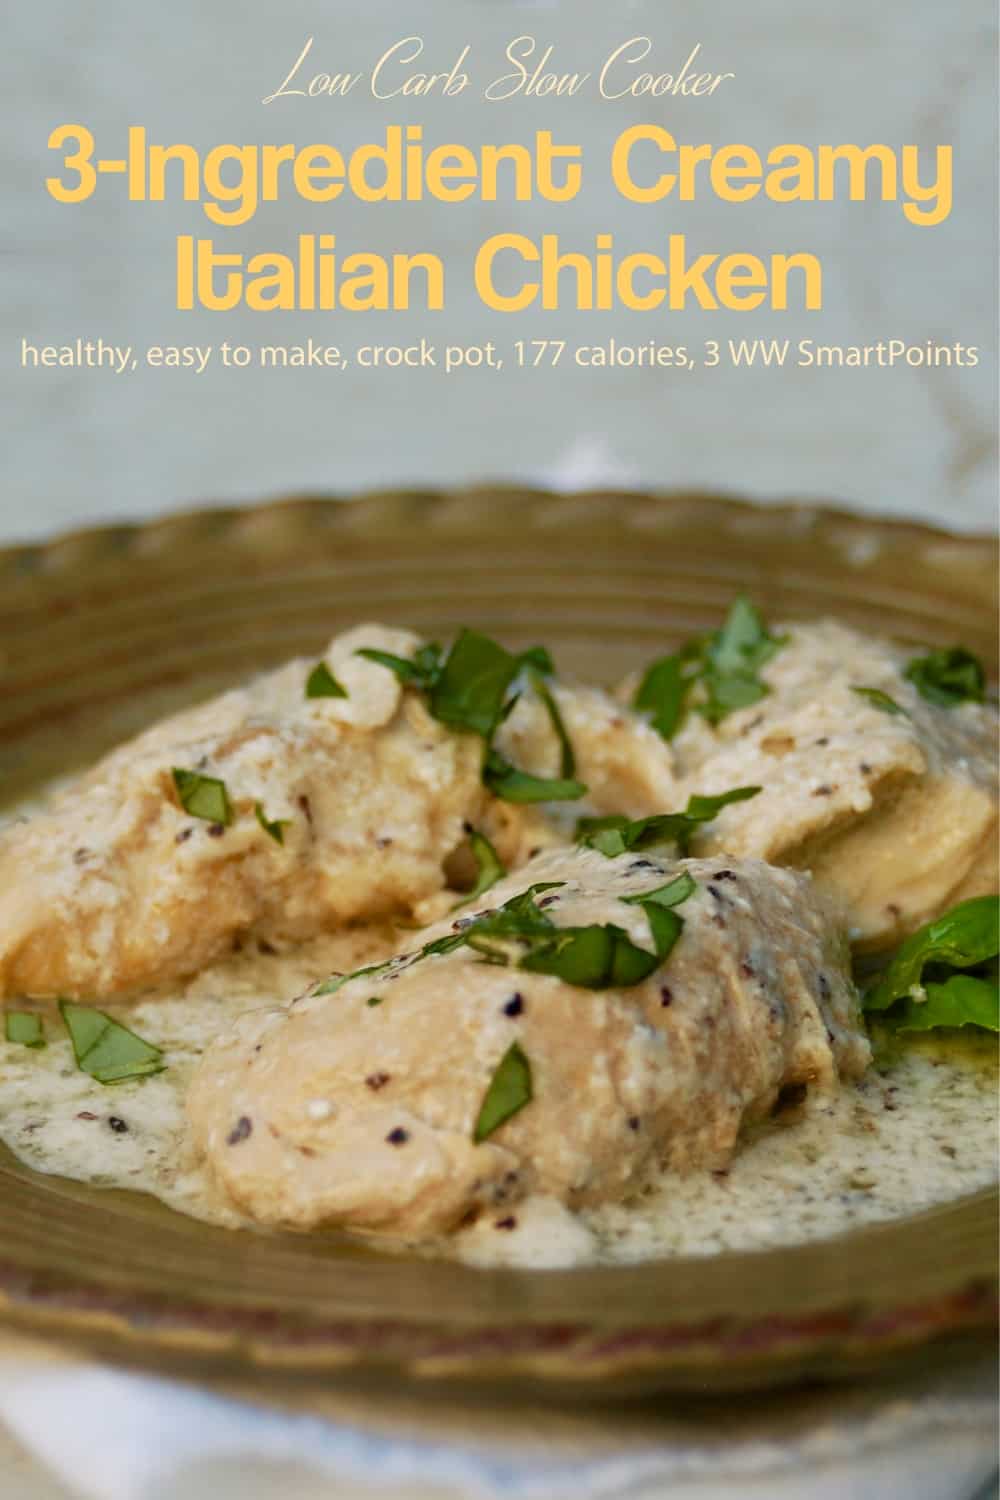 Slow cooker 3-ingredient creamy italian chicken garnished with fresh chopped basil on serving platter.